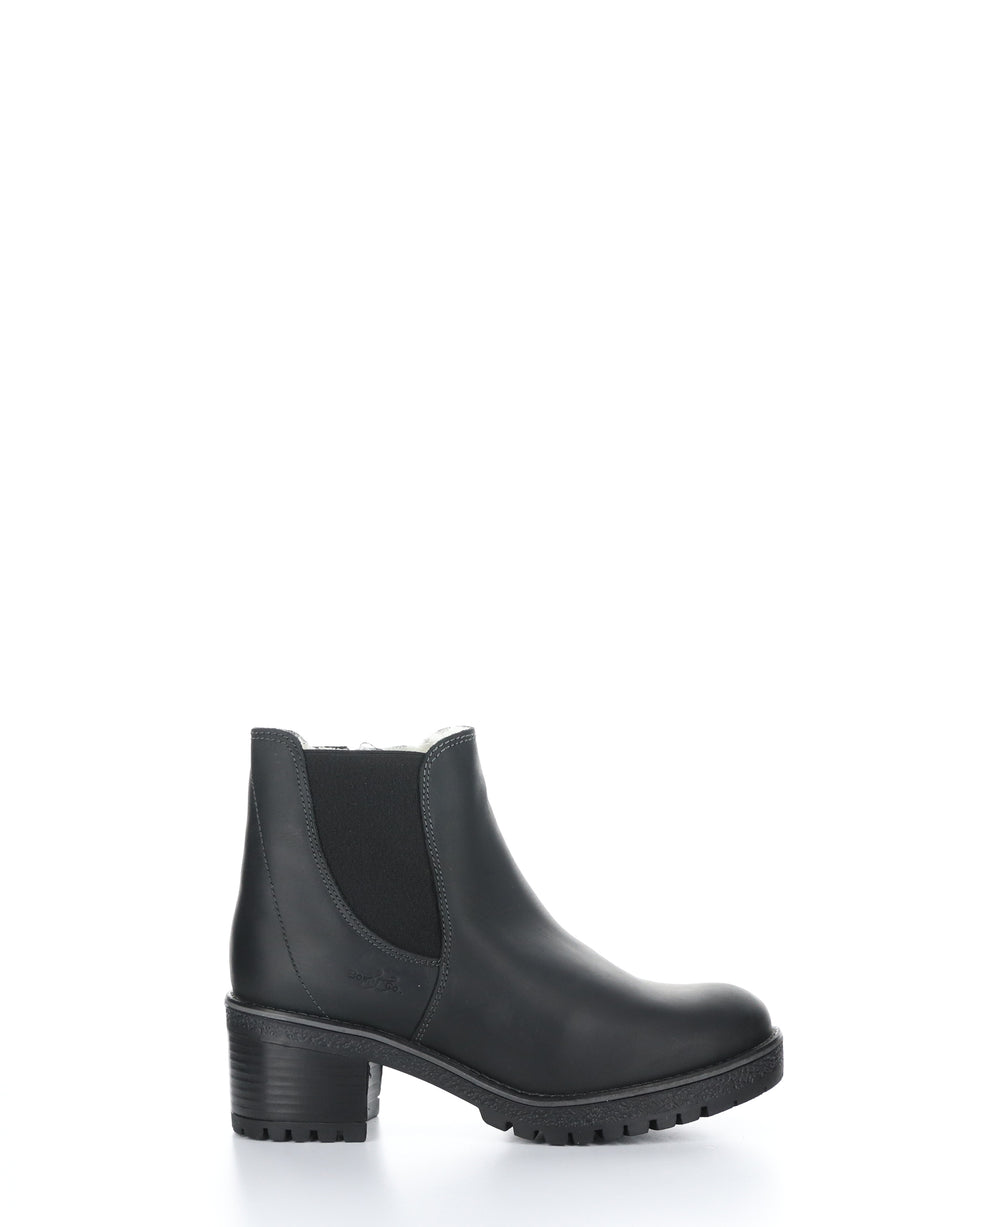 MASI Black Zip Up Ankle Boots